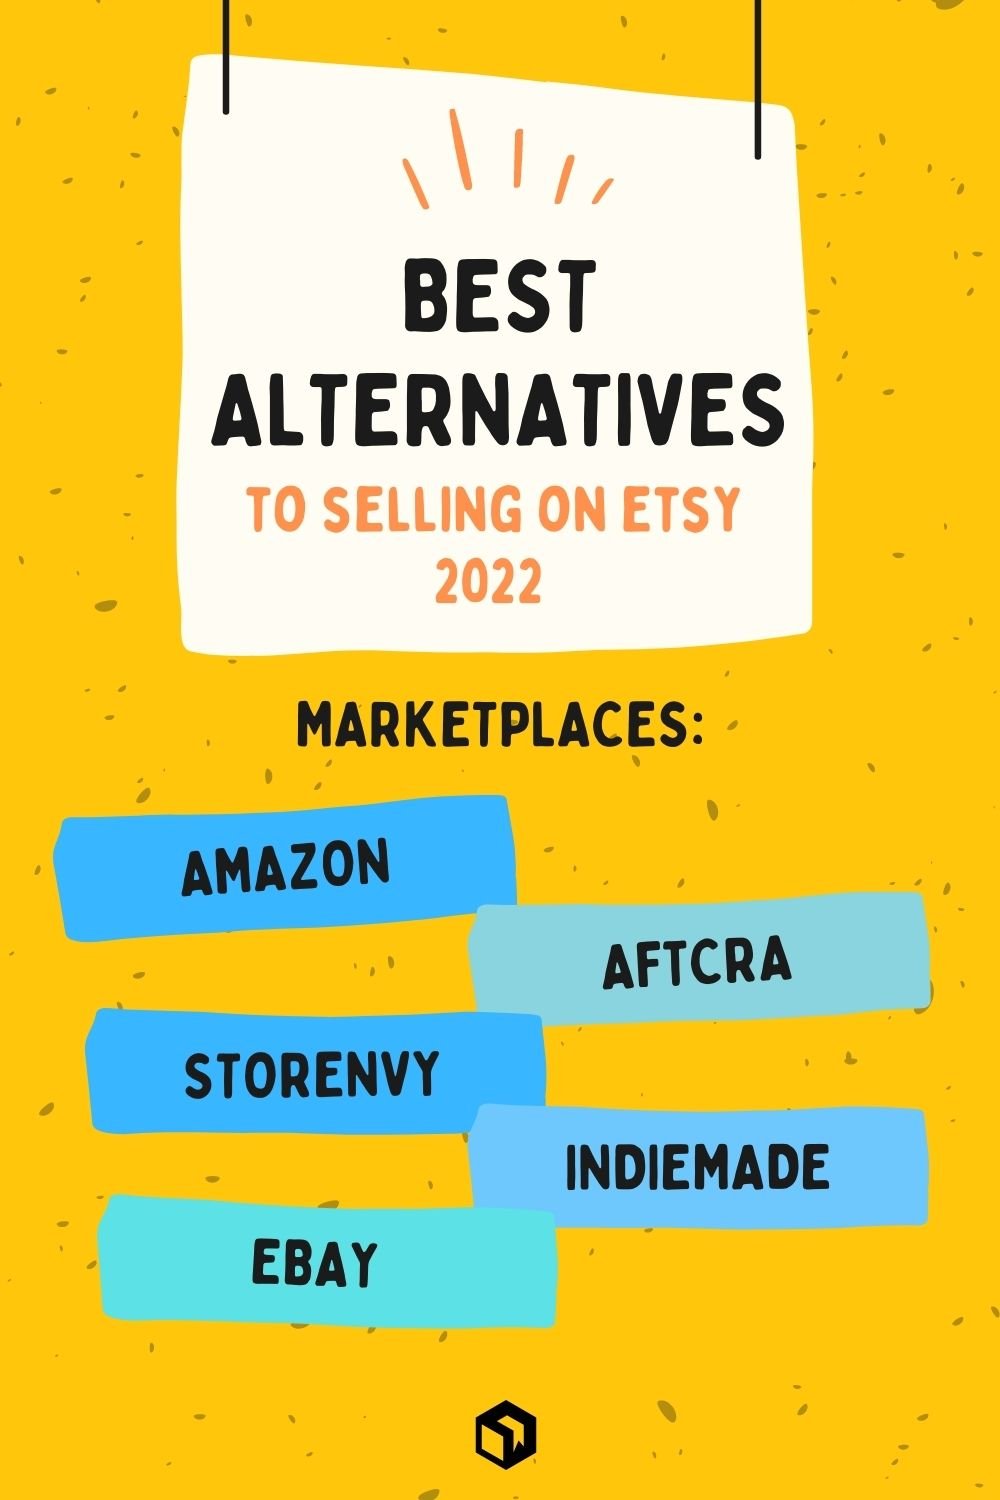 Best alternatives to selling on Etsy in 2022: Marketplace options